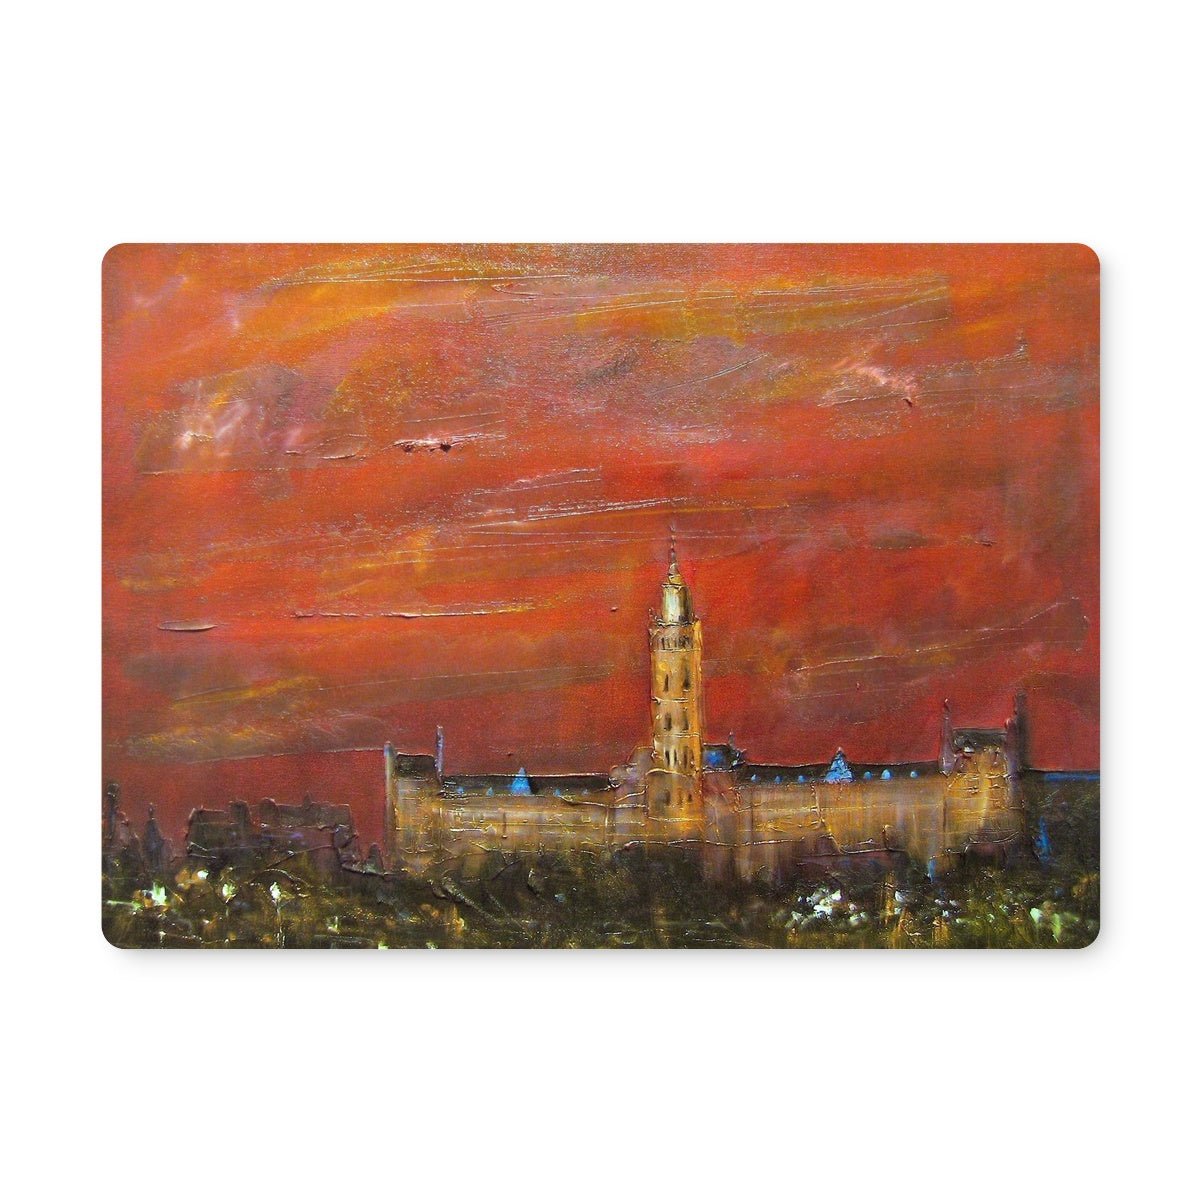 Glasgow University Dusk Art Gifts Placemat-Placemats-Edinburgh & Glasgow Art Gallery-Single Placemat-Paintings, Prints, Homeware, Art Gifts From Scotland By Scottish Artist Kevin Hunter